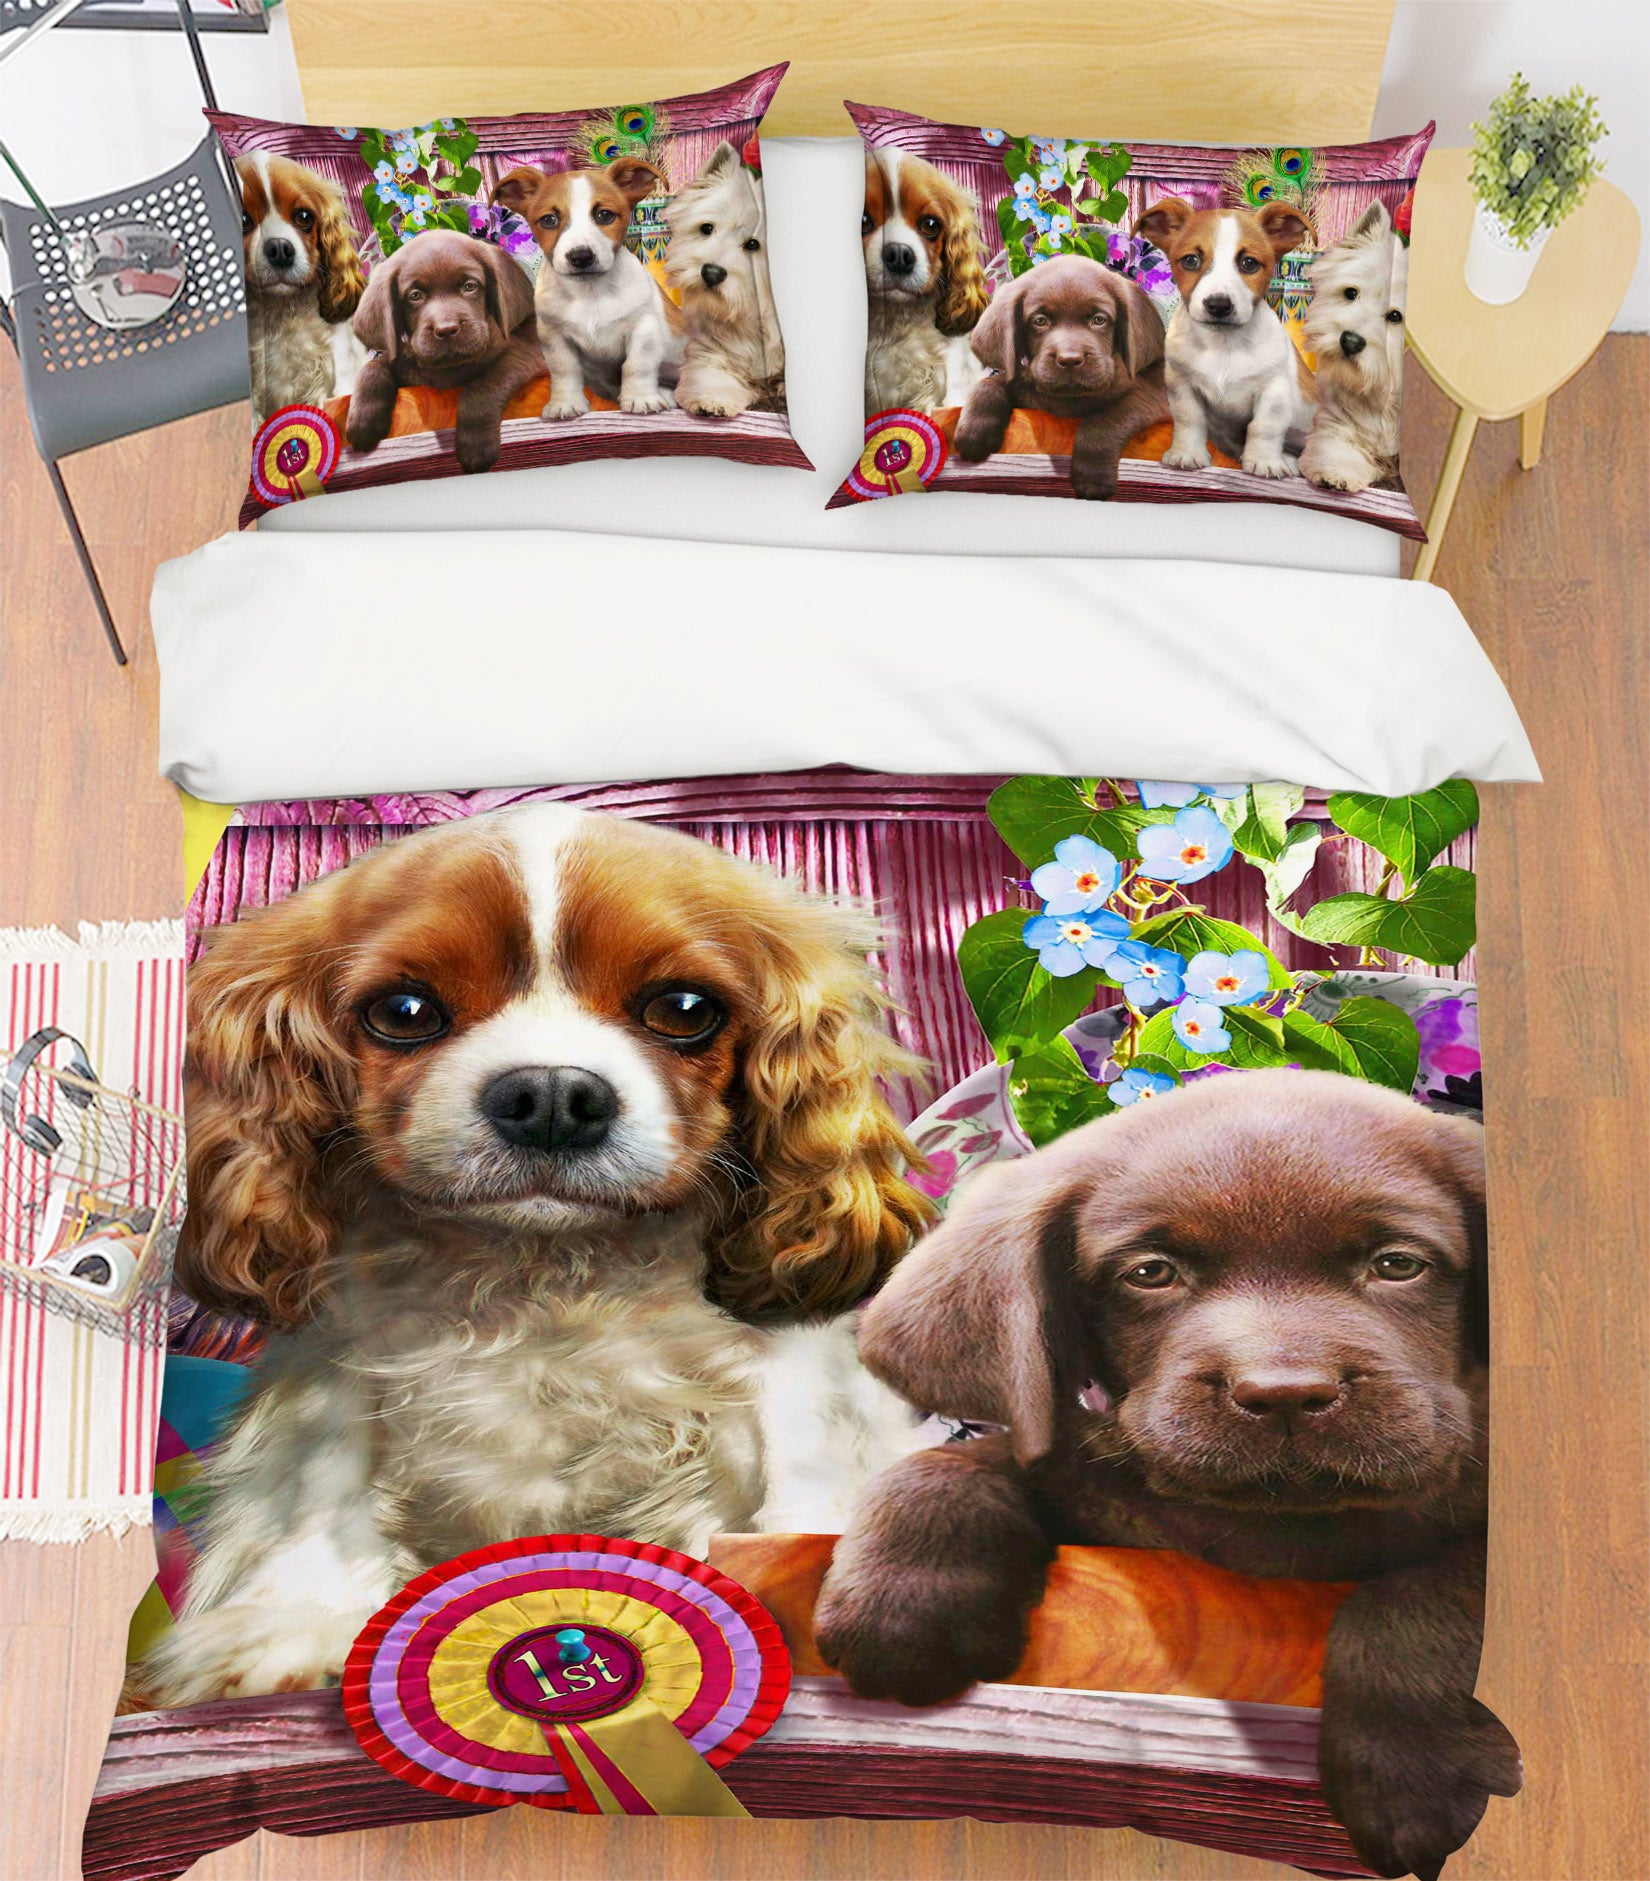 3D Cute Dog 2107 Adrian Chesterman Bedding Bed Pillowcases Quilt